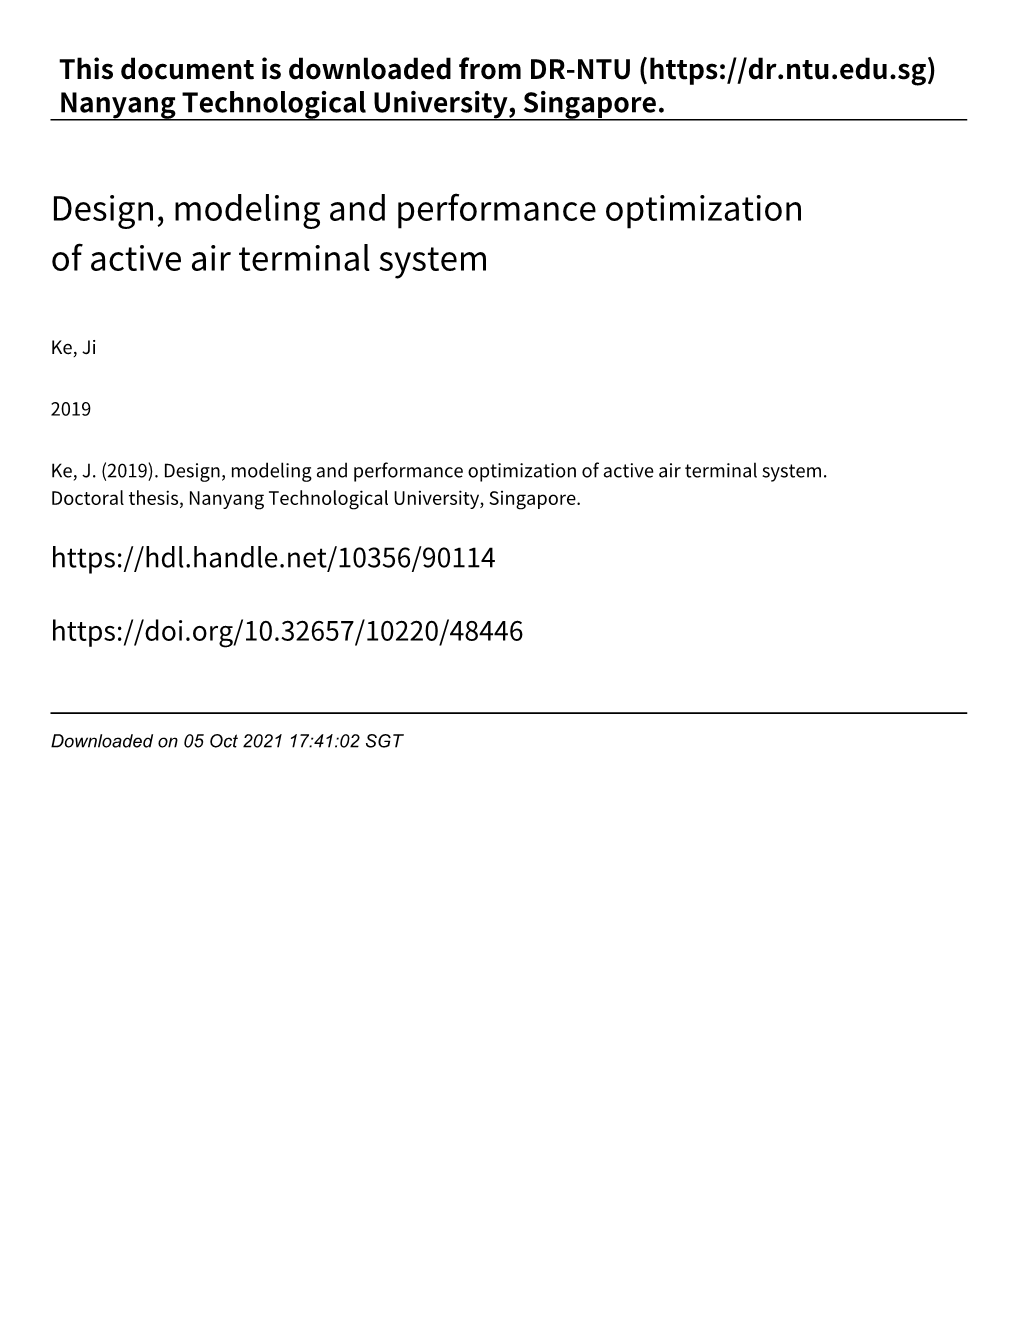 Design, Modeling and Performance Optimization of Active Air Terminal System